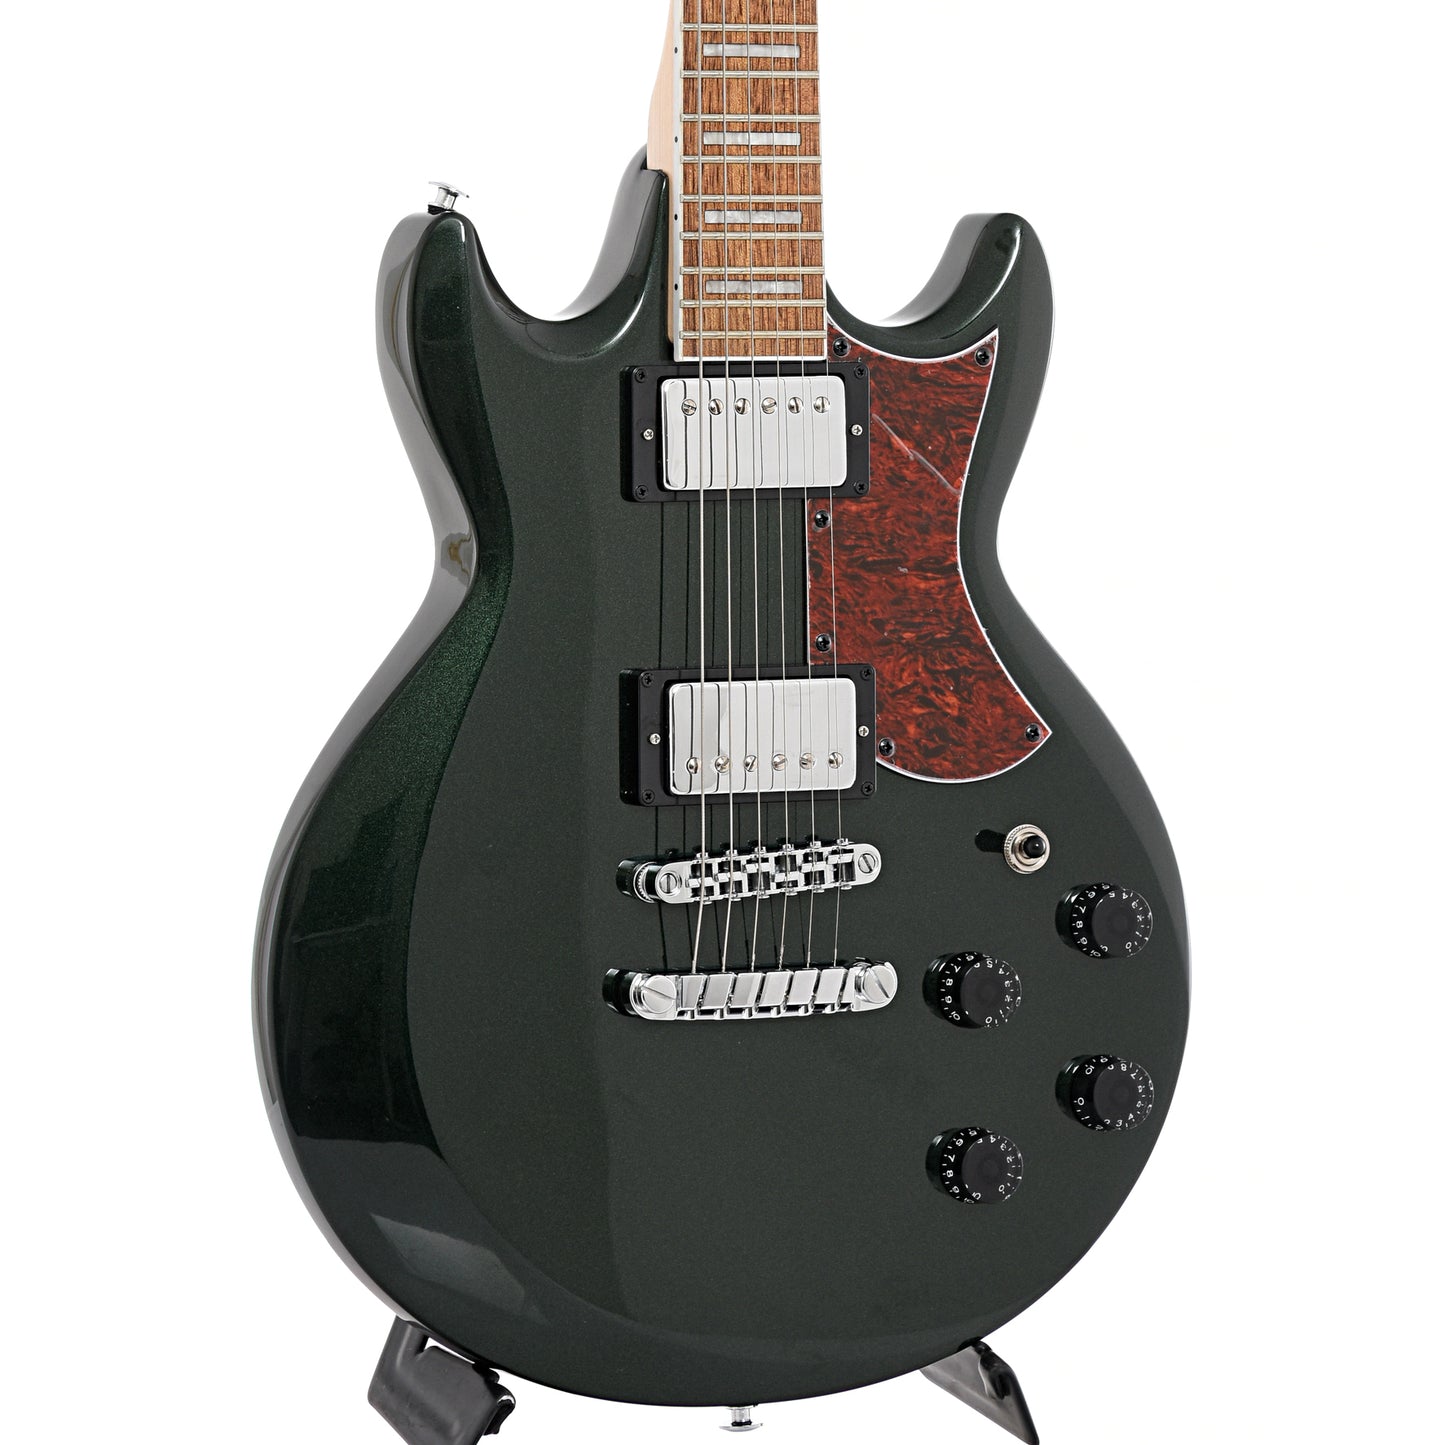 Front and side of Ibanez AX120 Electric Guitar, Metallic Forest